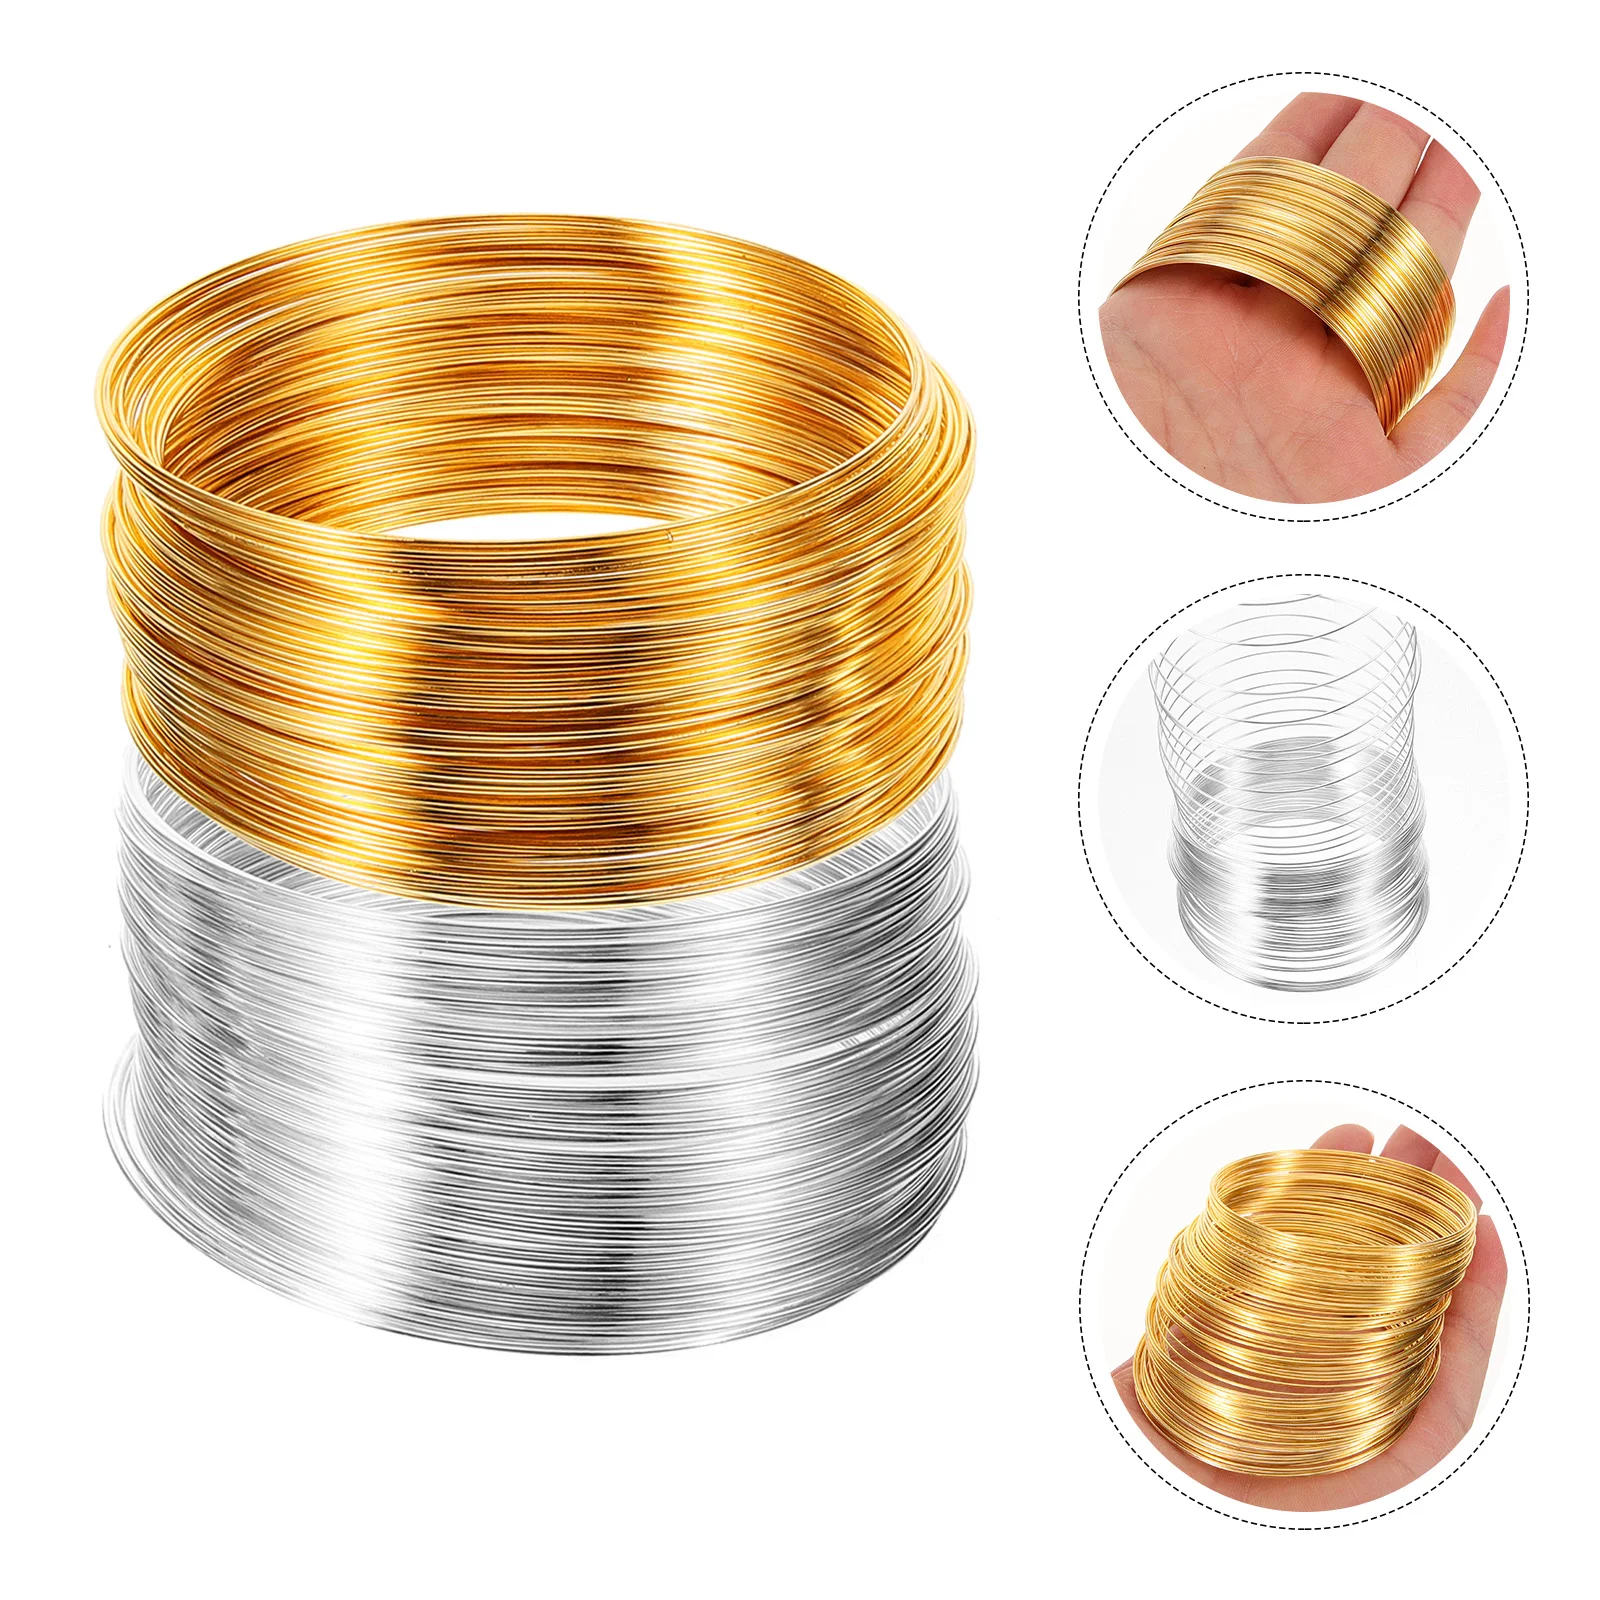 

2 Rolls Jewelry Line Making Supplies Wear-resistant Beads Wire Stainless Steel Jewlery Convenient Metal DIY Beading Cord